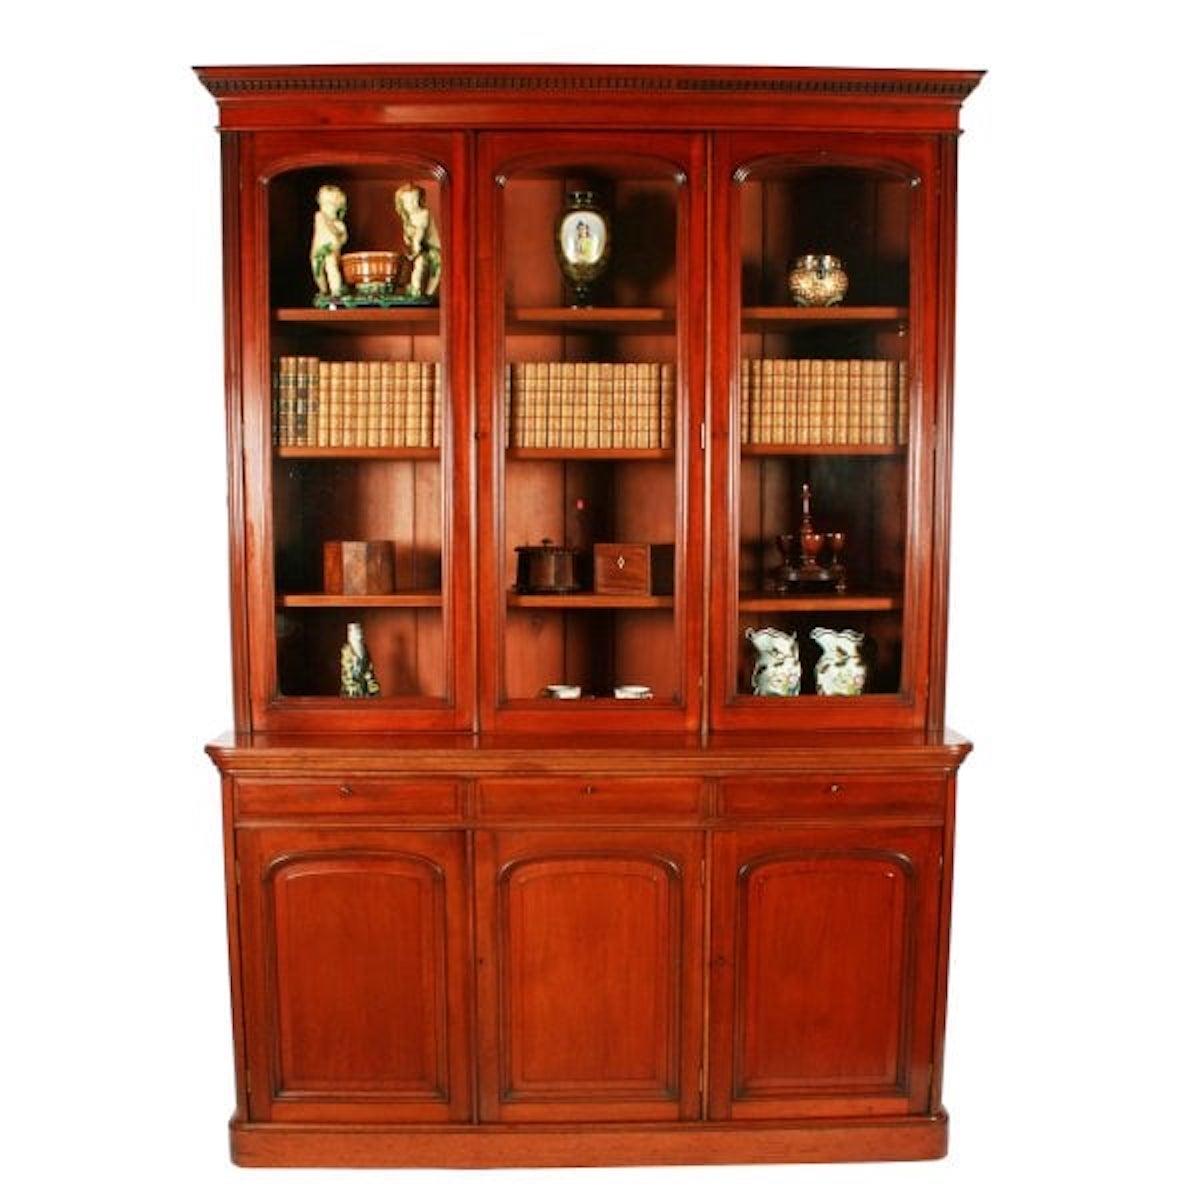 A 19th century Victorian mahogany three door bookcase.

The glazed top has a pair of doors that open to four adjustable shelves, (only three are shown in the photos), and a single door that again opening to four adjustable shelves.

The base has